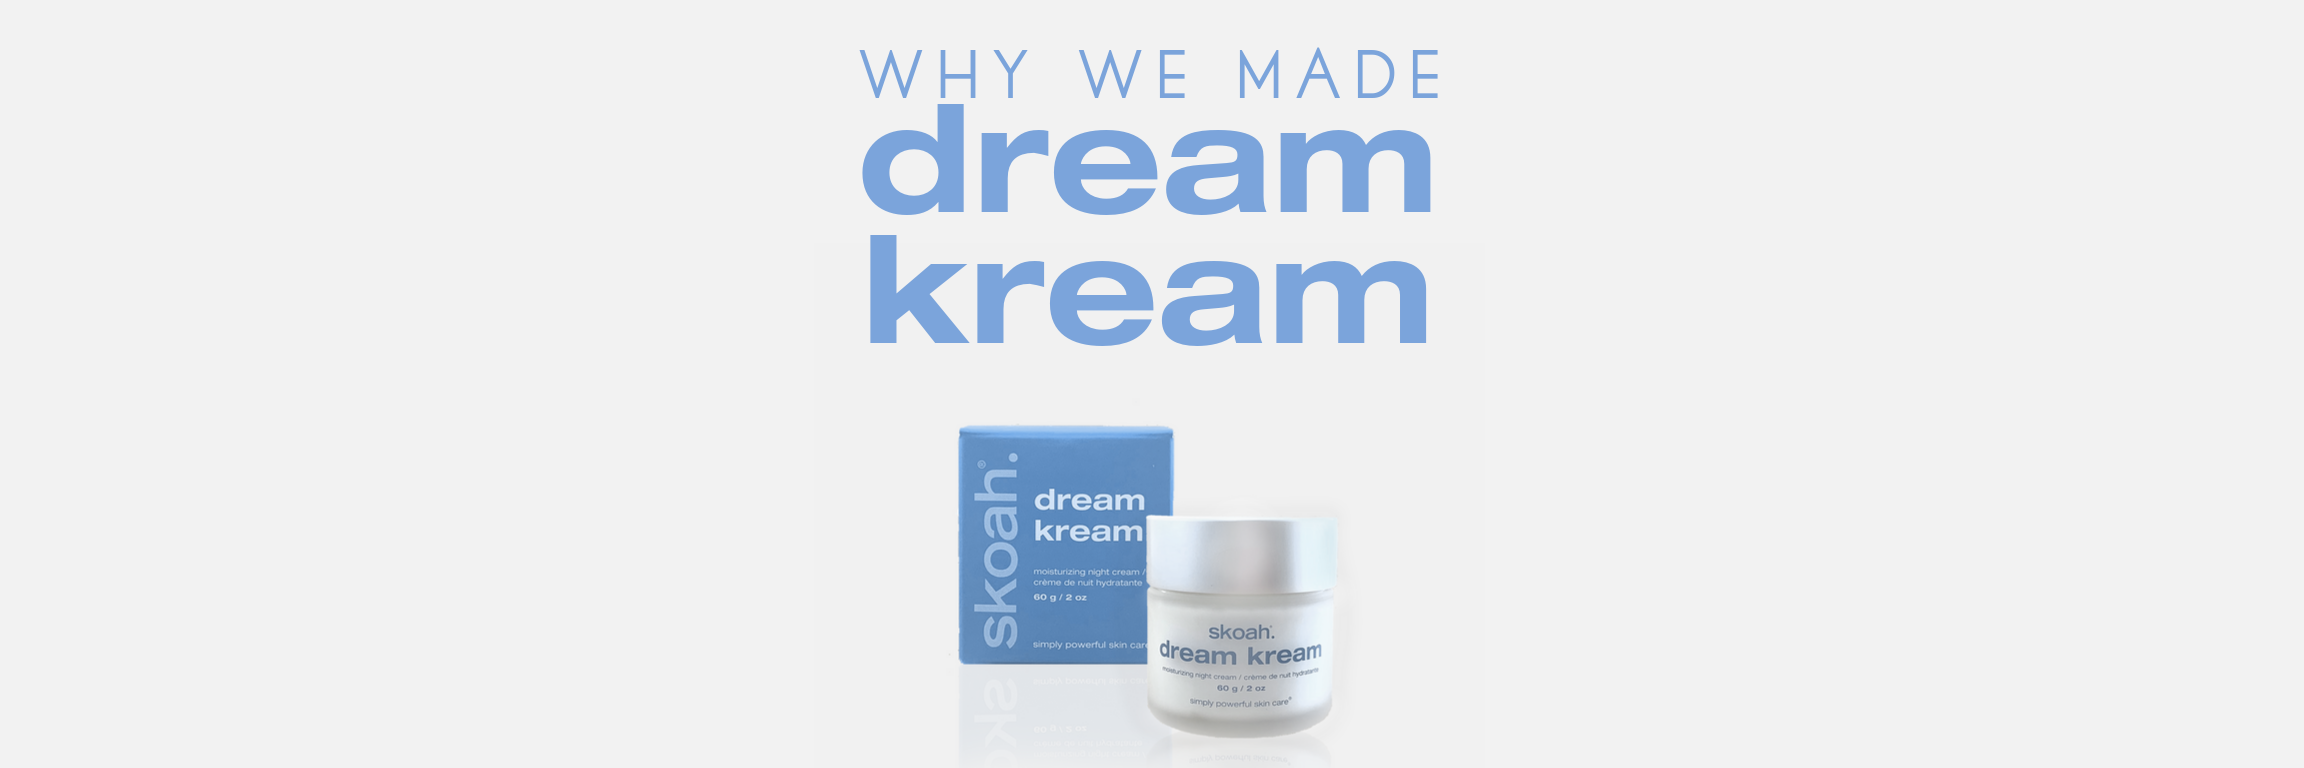 Why we made the Dream Kream